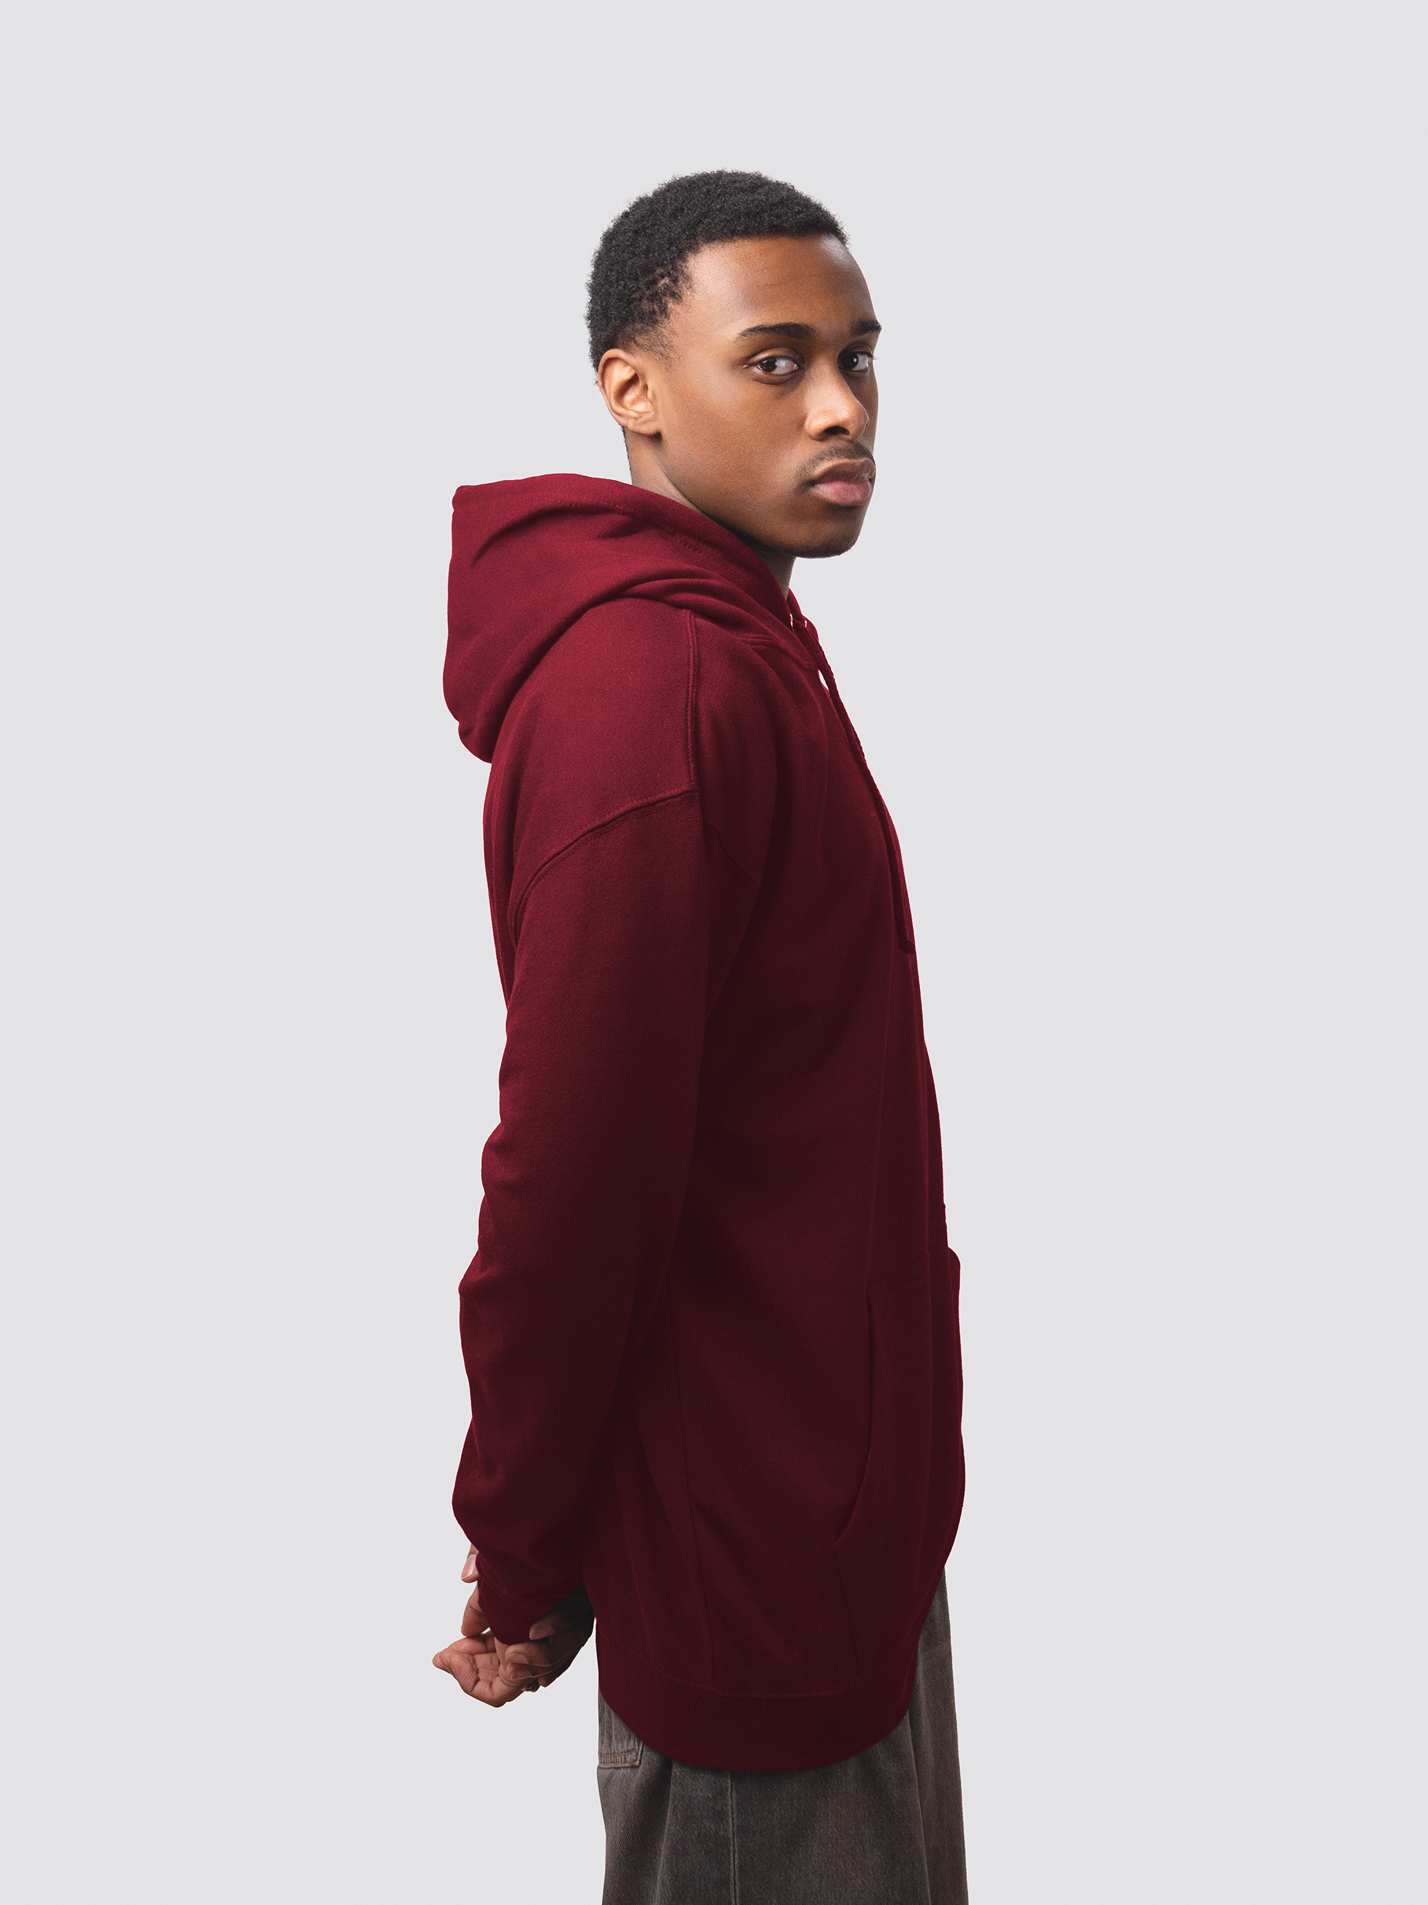 Exeter College hoodie, made from burgundy cotton-faced fabric